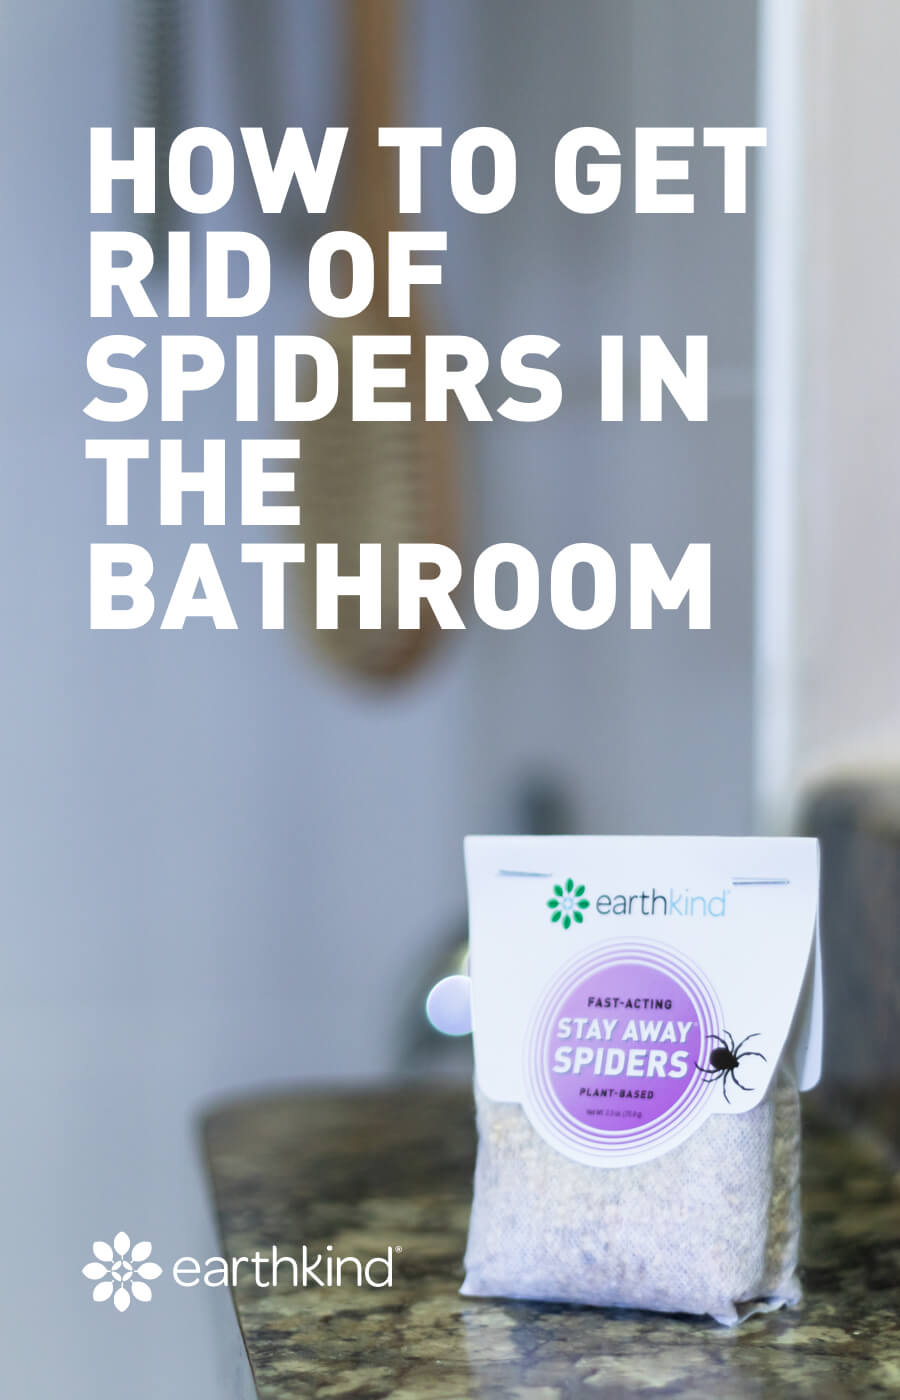 How to get rid of spiders in the bathroom using Stay Away Spiders by EarthKind